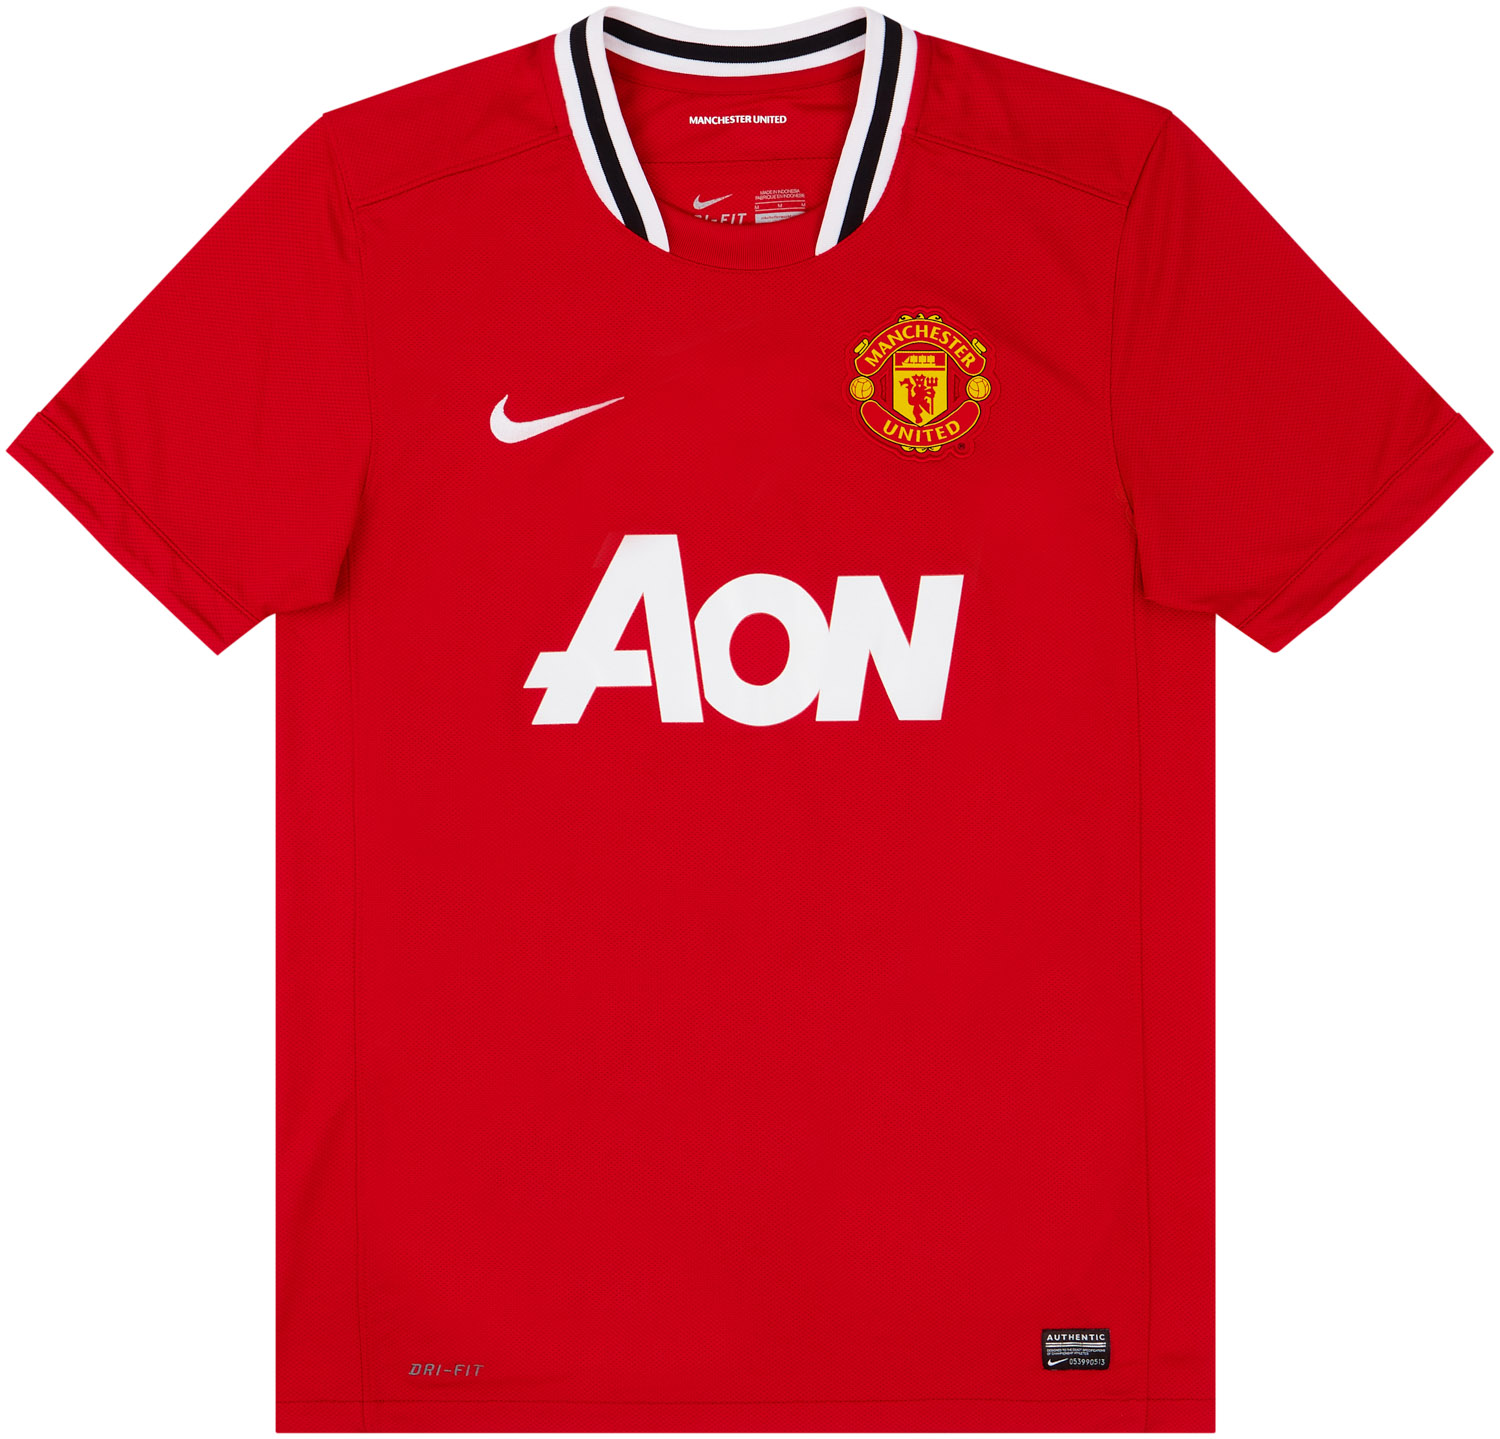 2011-12 Manchester United Home Shirt - 7/10 -